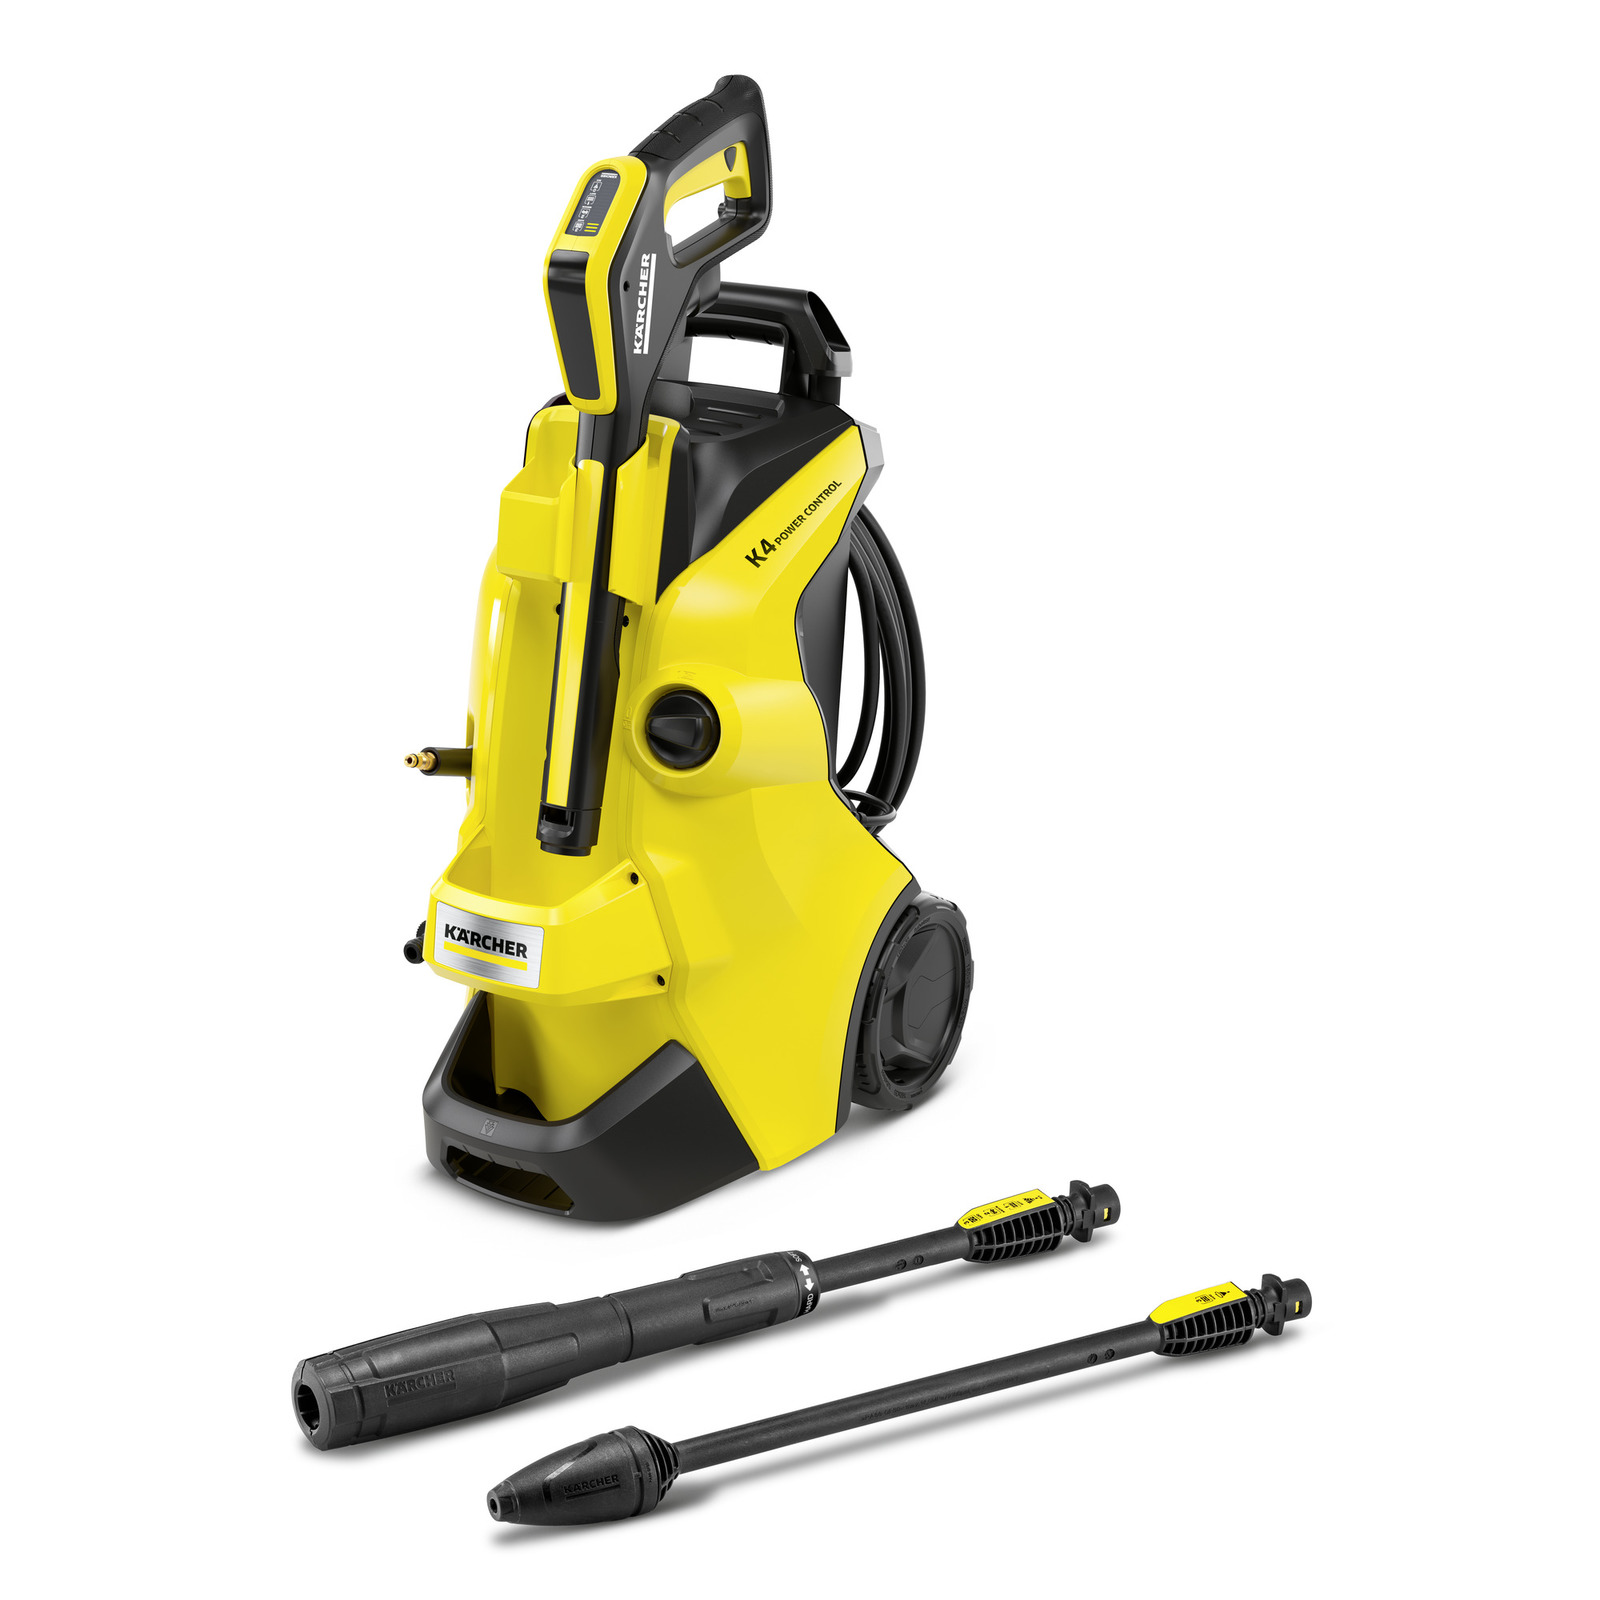 SODIAL Real Sand And Wet Sand And Wet For Karcher K2 K3 K4 K5 K6 K7 High Pressure Washers With Copper Nozzle Carwashers 